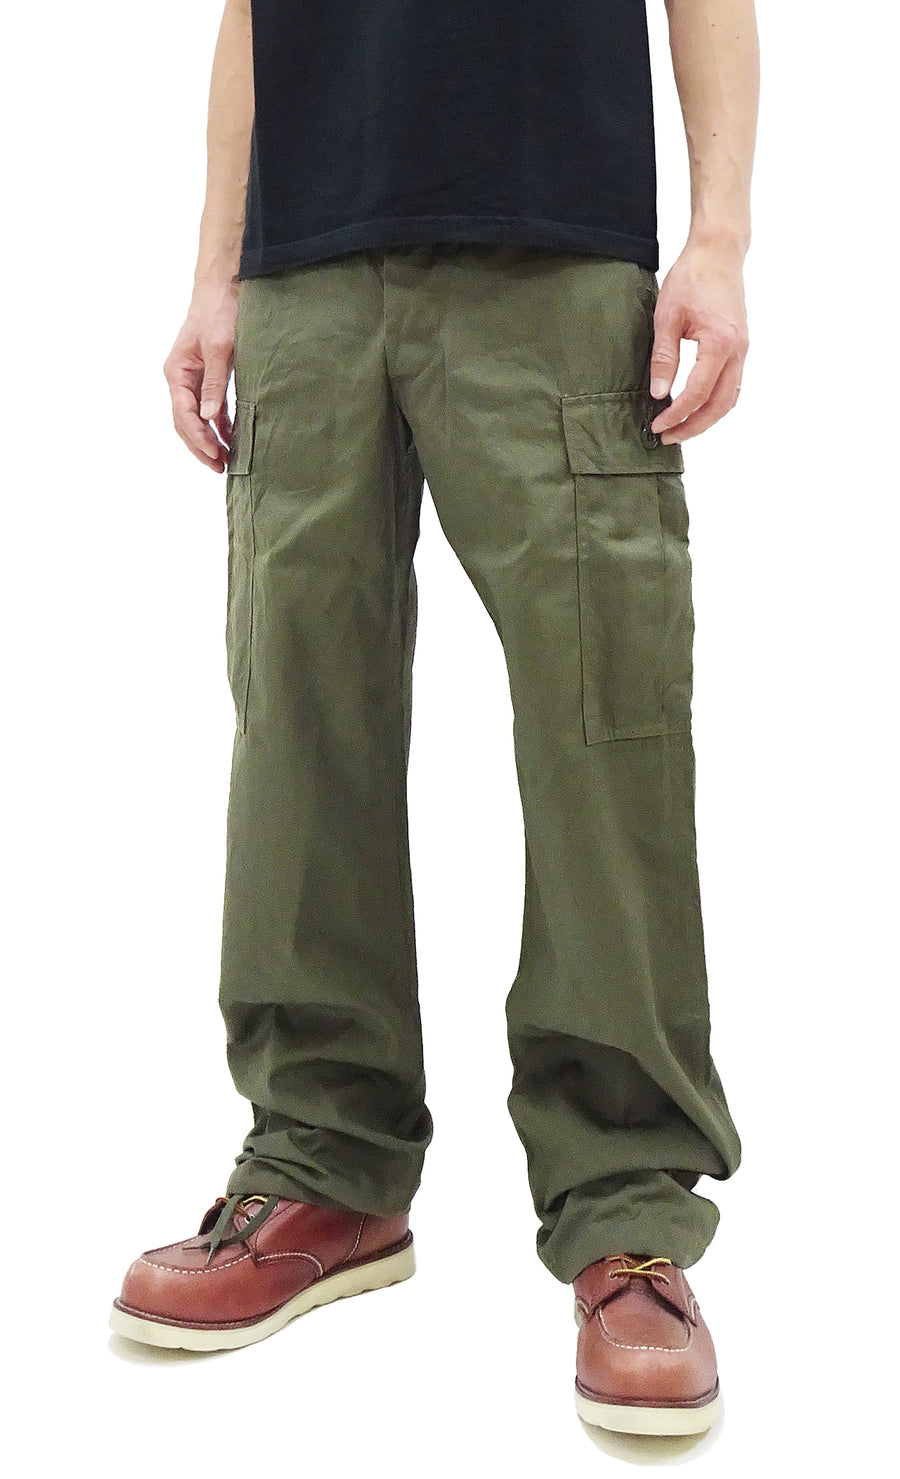 Mens Cargo Pants with Six Pocket Stretch Cotton Cargo Work Pants for Men